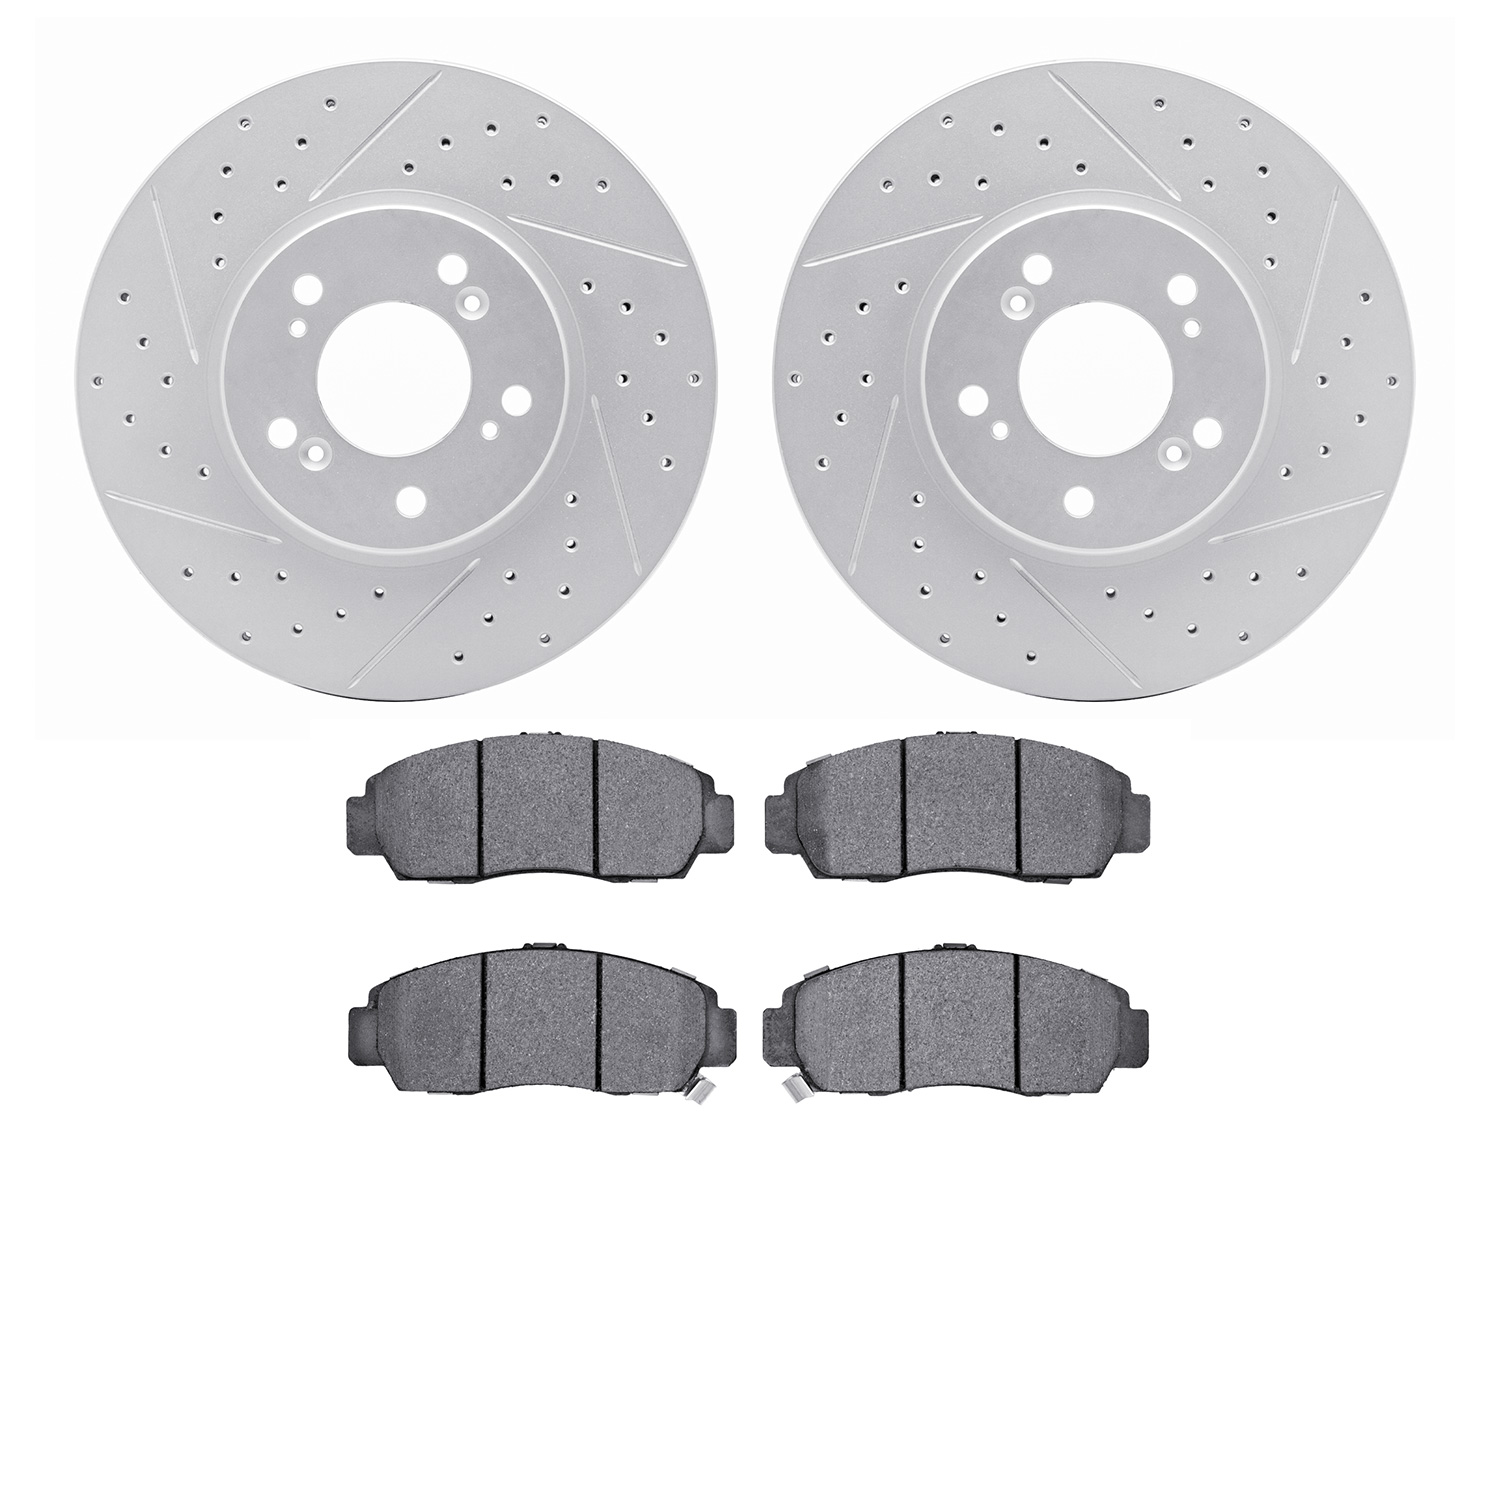 2502-58010 Geoperformance Drilled/Slotted Rotors w/5000 Advanced Brake Pads Kit, 1999-2004 Acura/Honda, Position: Front